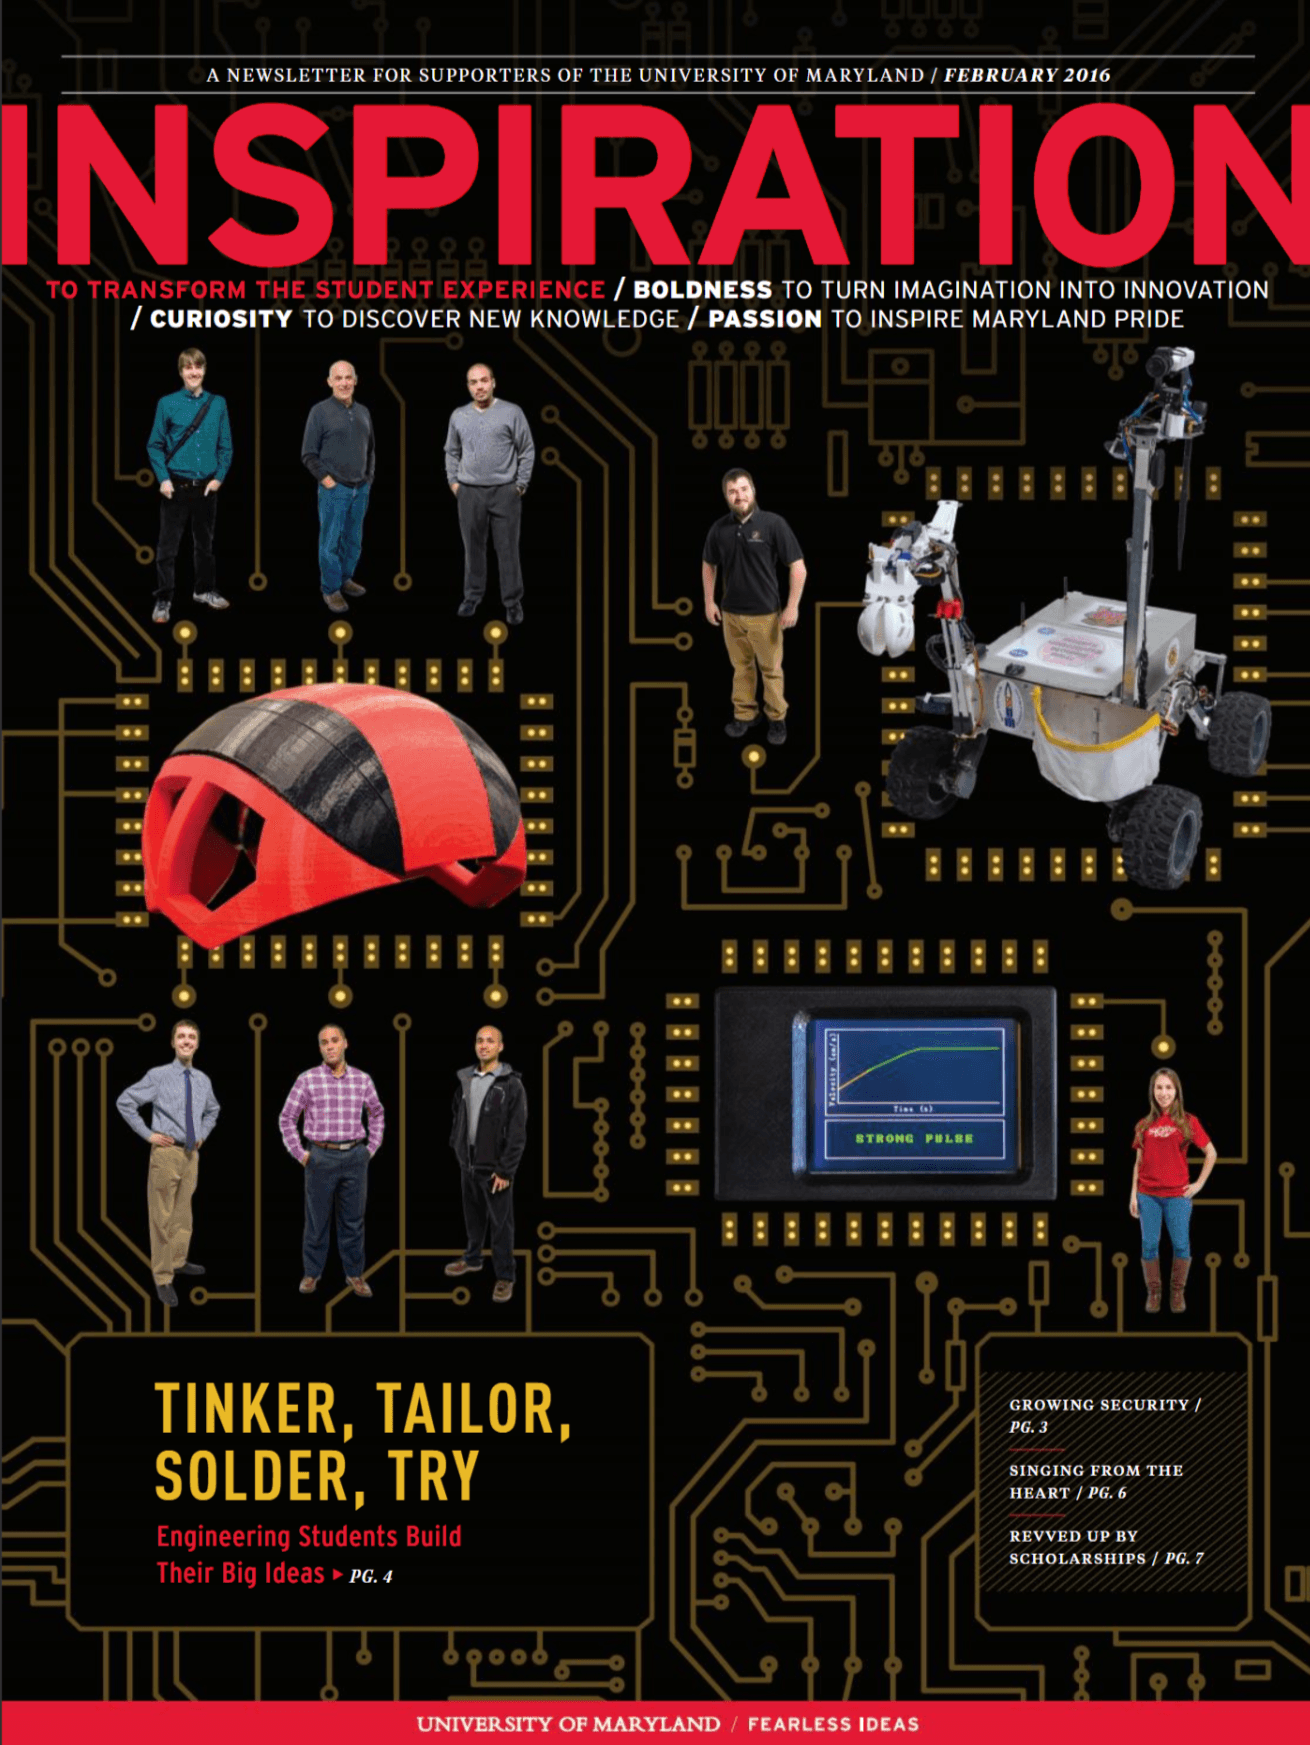 Cover of February 2016 Giving Newsletter. Black magazine cover with circuitry, people, and robots